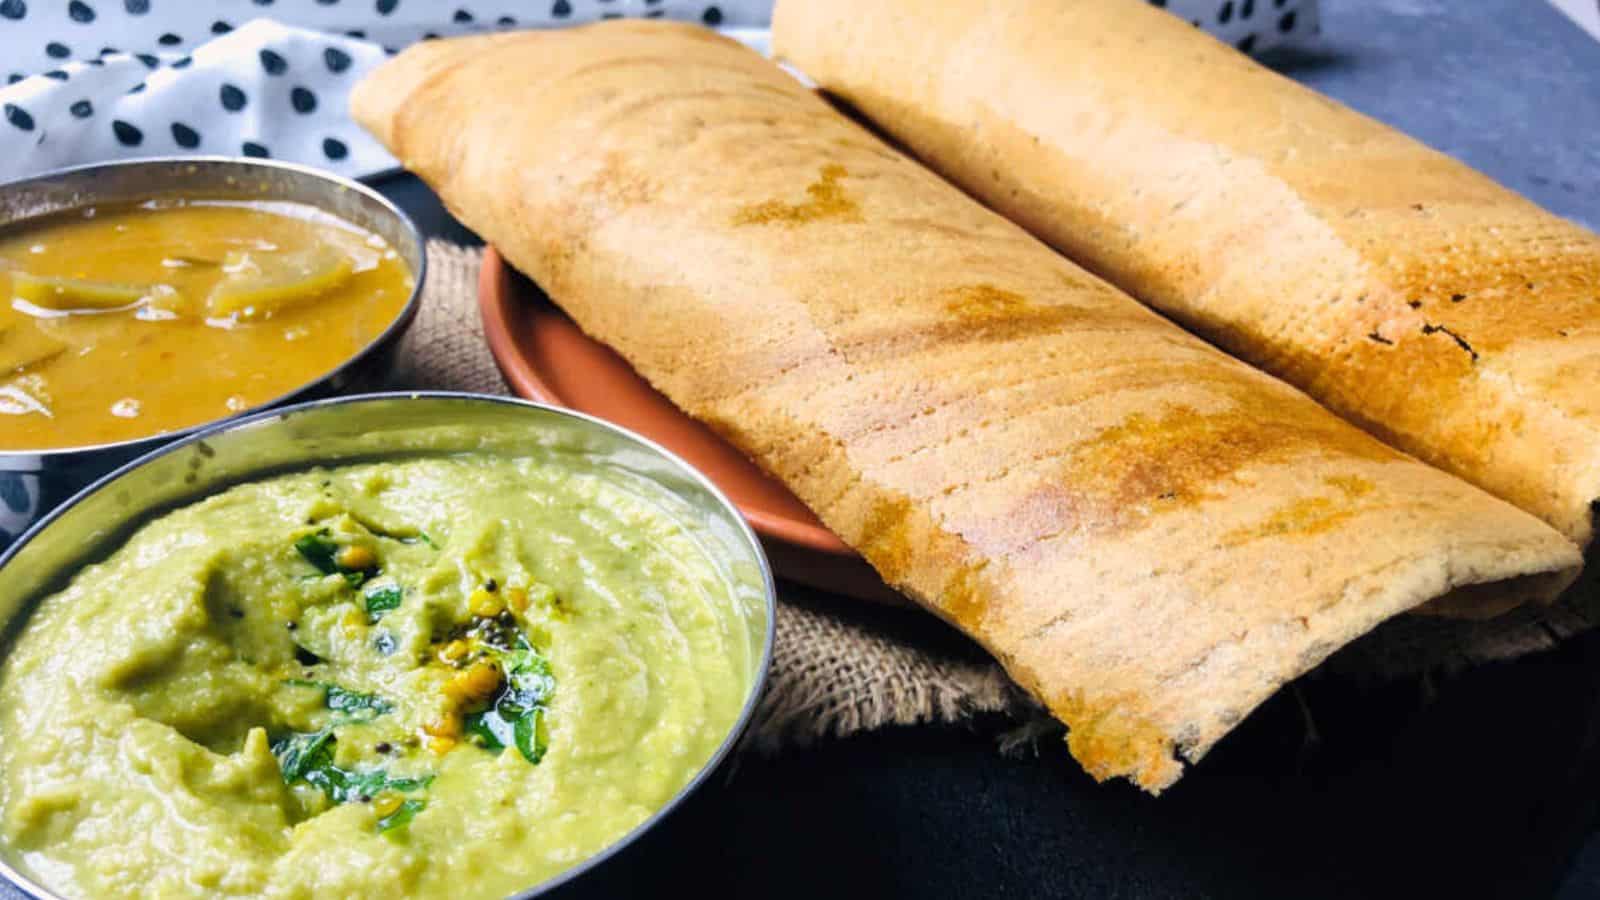 <p>This dosa turns a traditional favorite into a healthful treat without losing any of the beloved taste. It's crispy, light, and a delightful twist to the usual fare. If you're looking to explore health-conscious options, this won't disappoint.<br><strong>Get the Recipe: </strong><a href="https://easyindiancookbook.com/millet-dosa-recipe/?utm_source=msn&utm_medium=page&utm_campaign=msn">Millet Dosa Recipe</a></p>